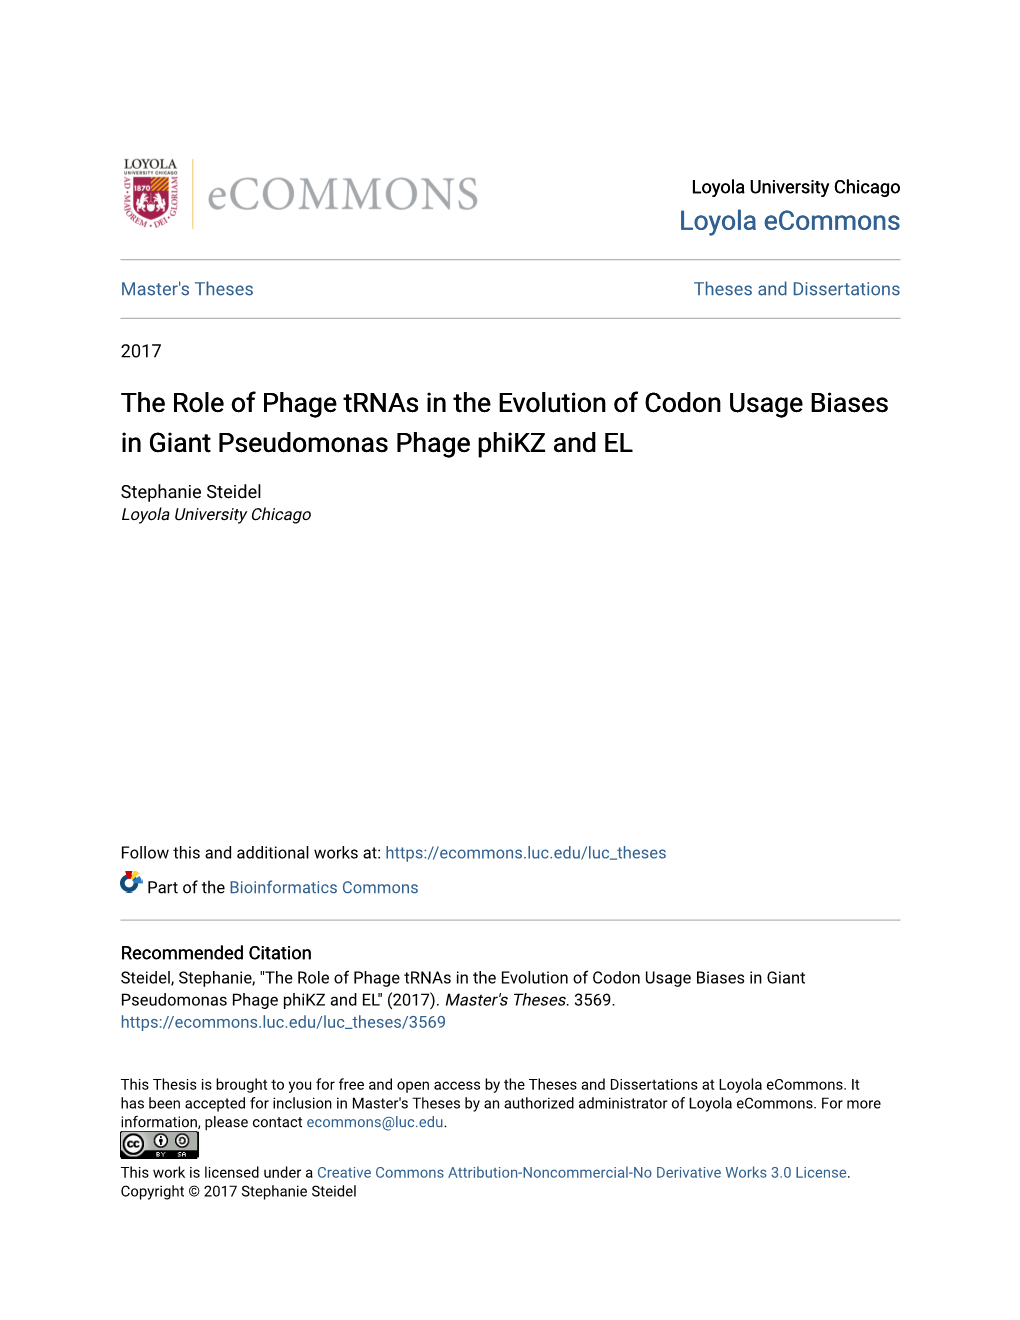 The Role of Phage Trnas in the Evolution of Codon Usage Biases in Giant Pseudomonas Phage Phikz and EL